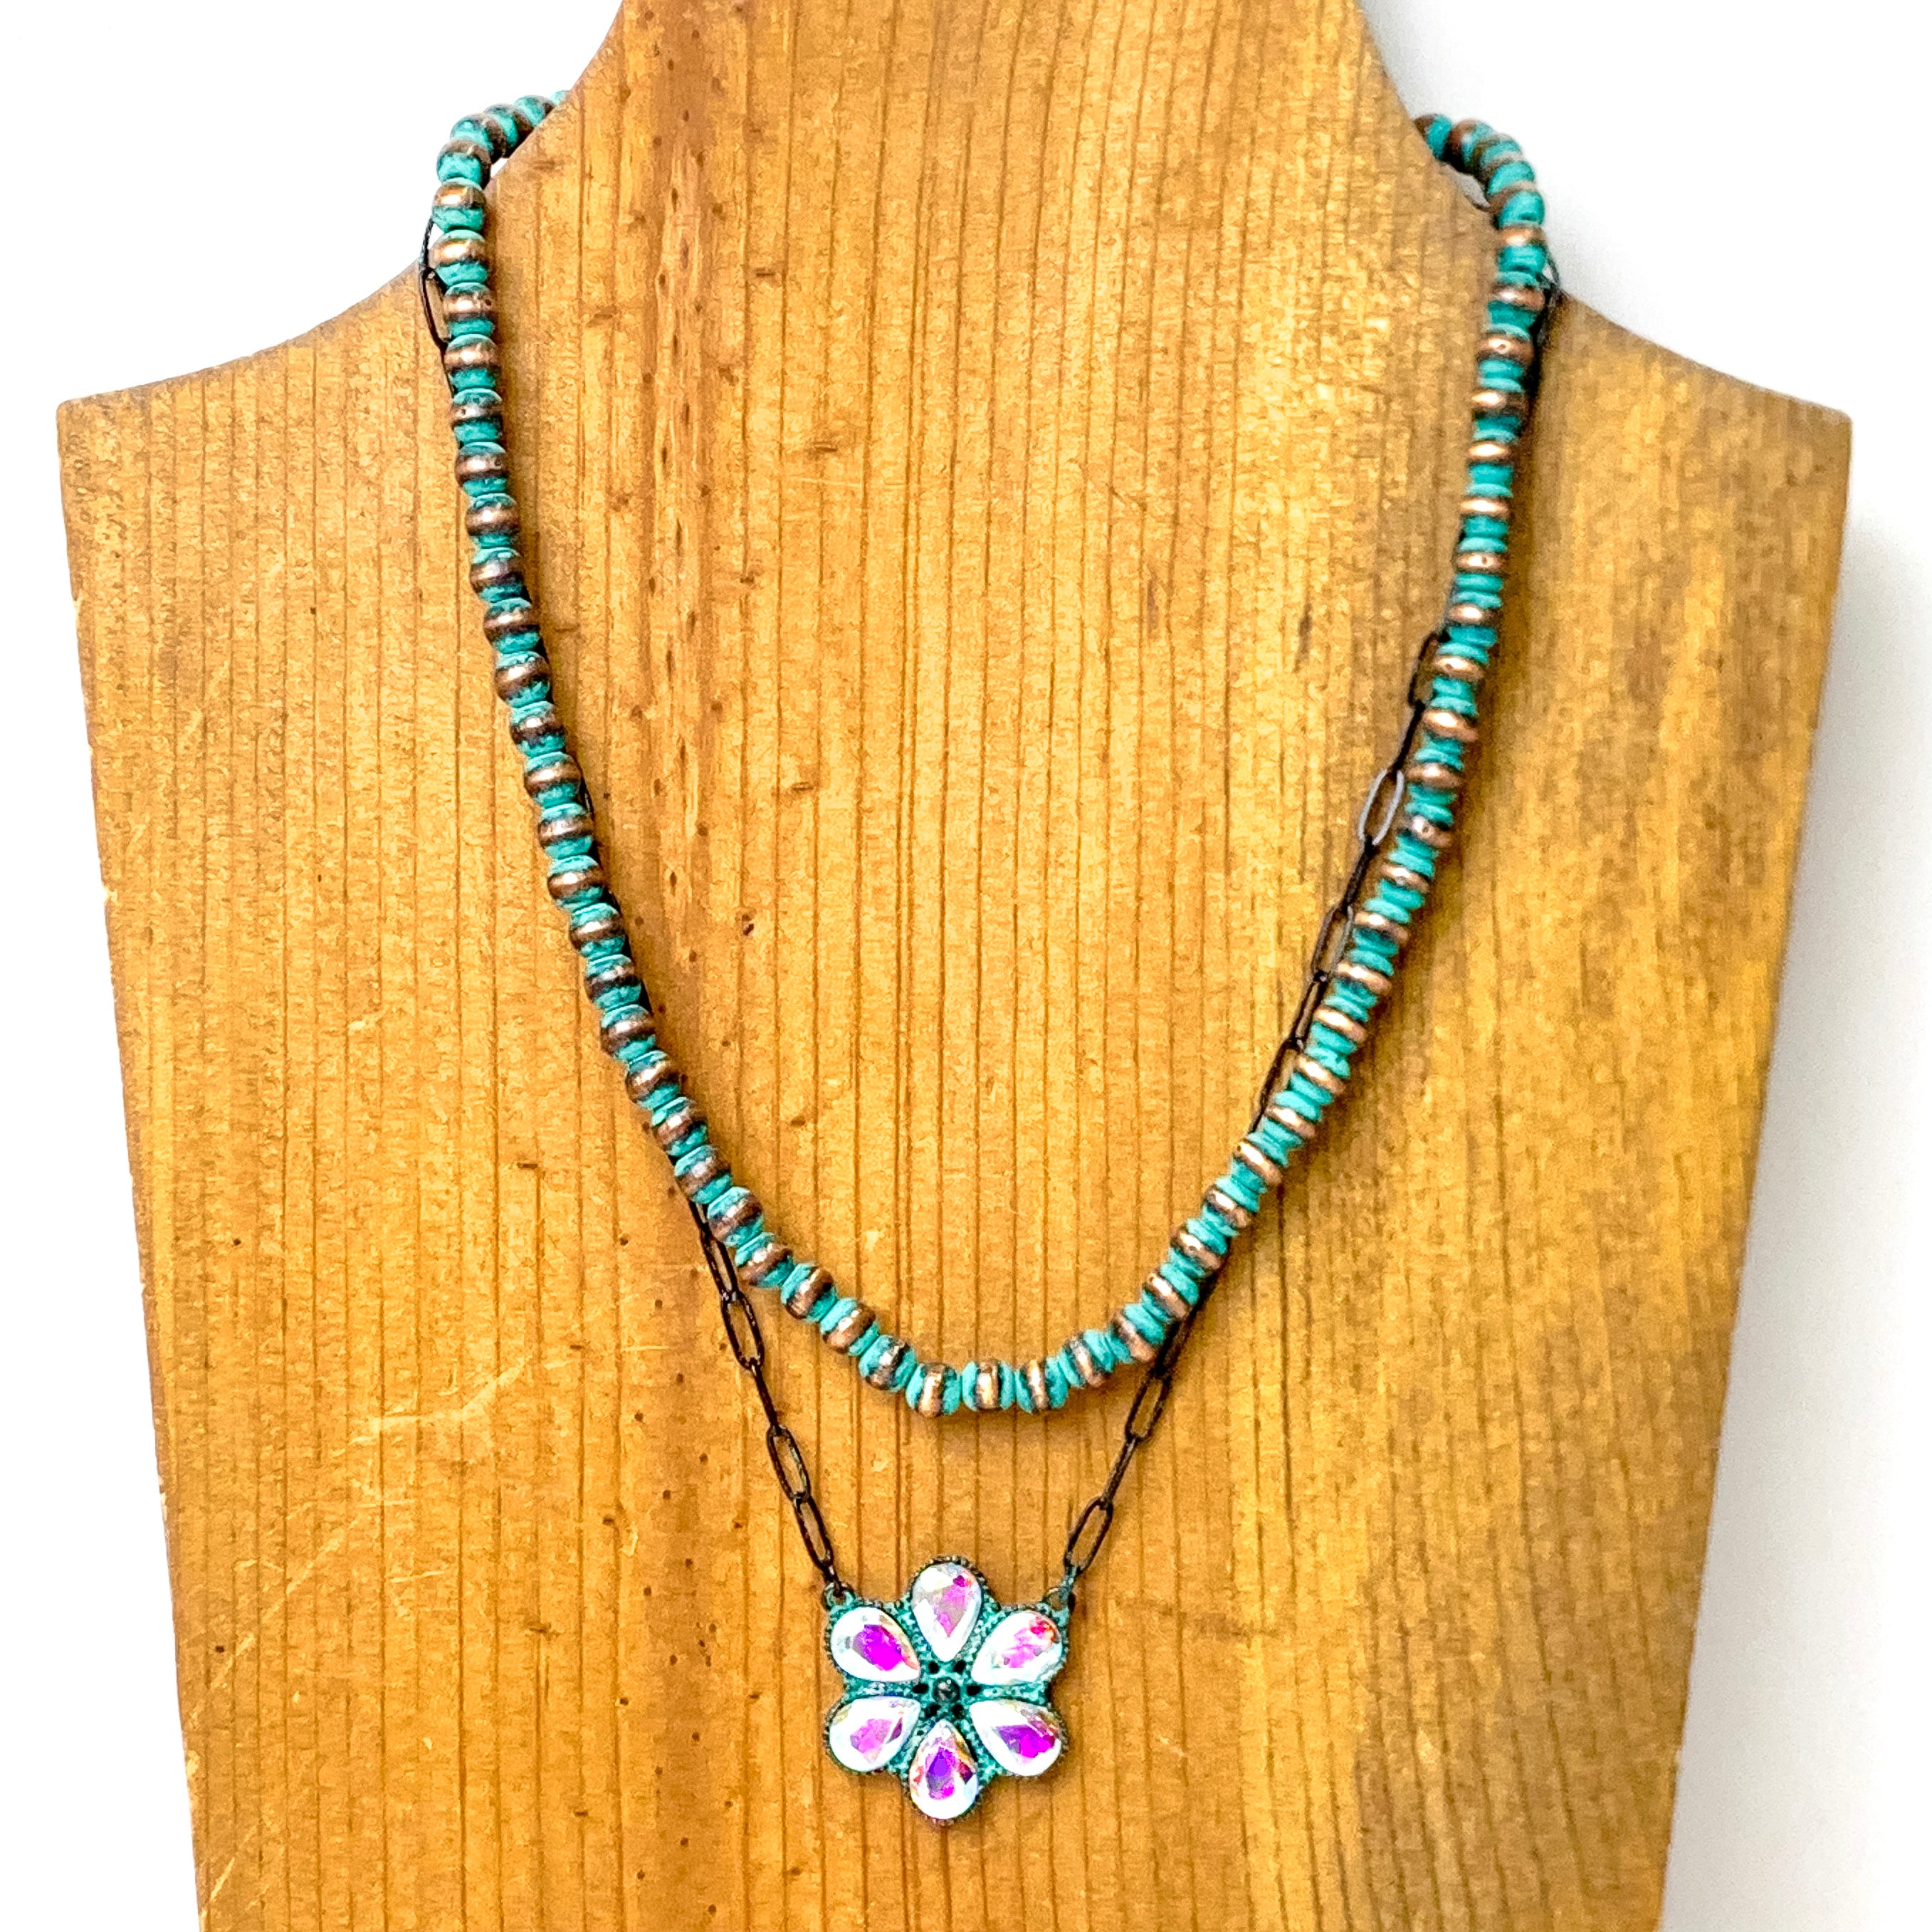 Prairie Petals Faux Navajo Pearl and Chain Necklace in Patina Tone - Giddy Up Glamour Boutique